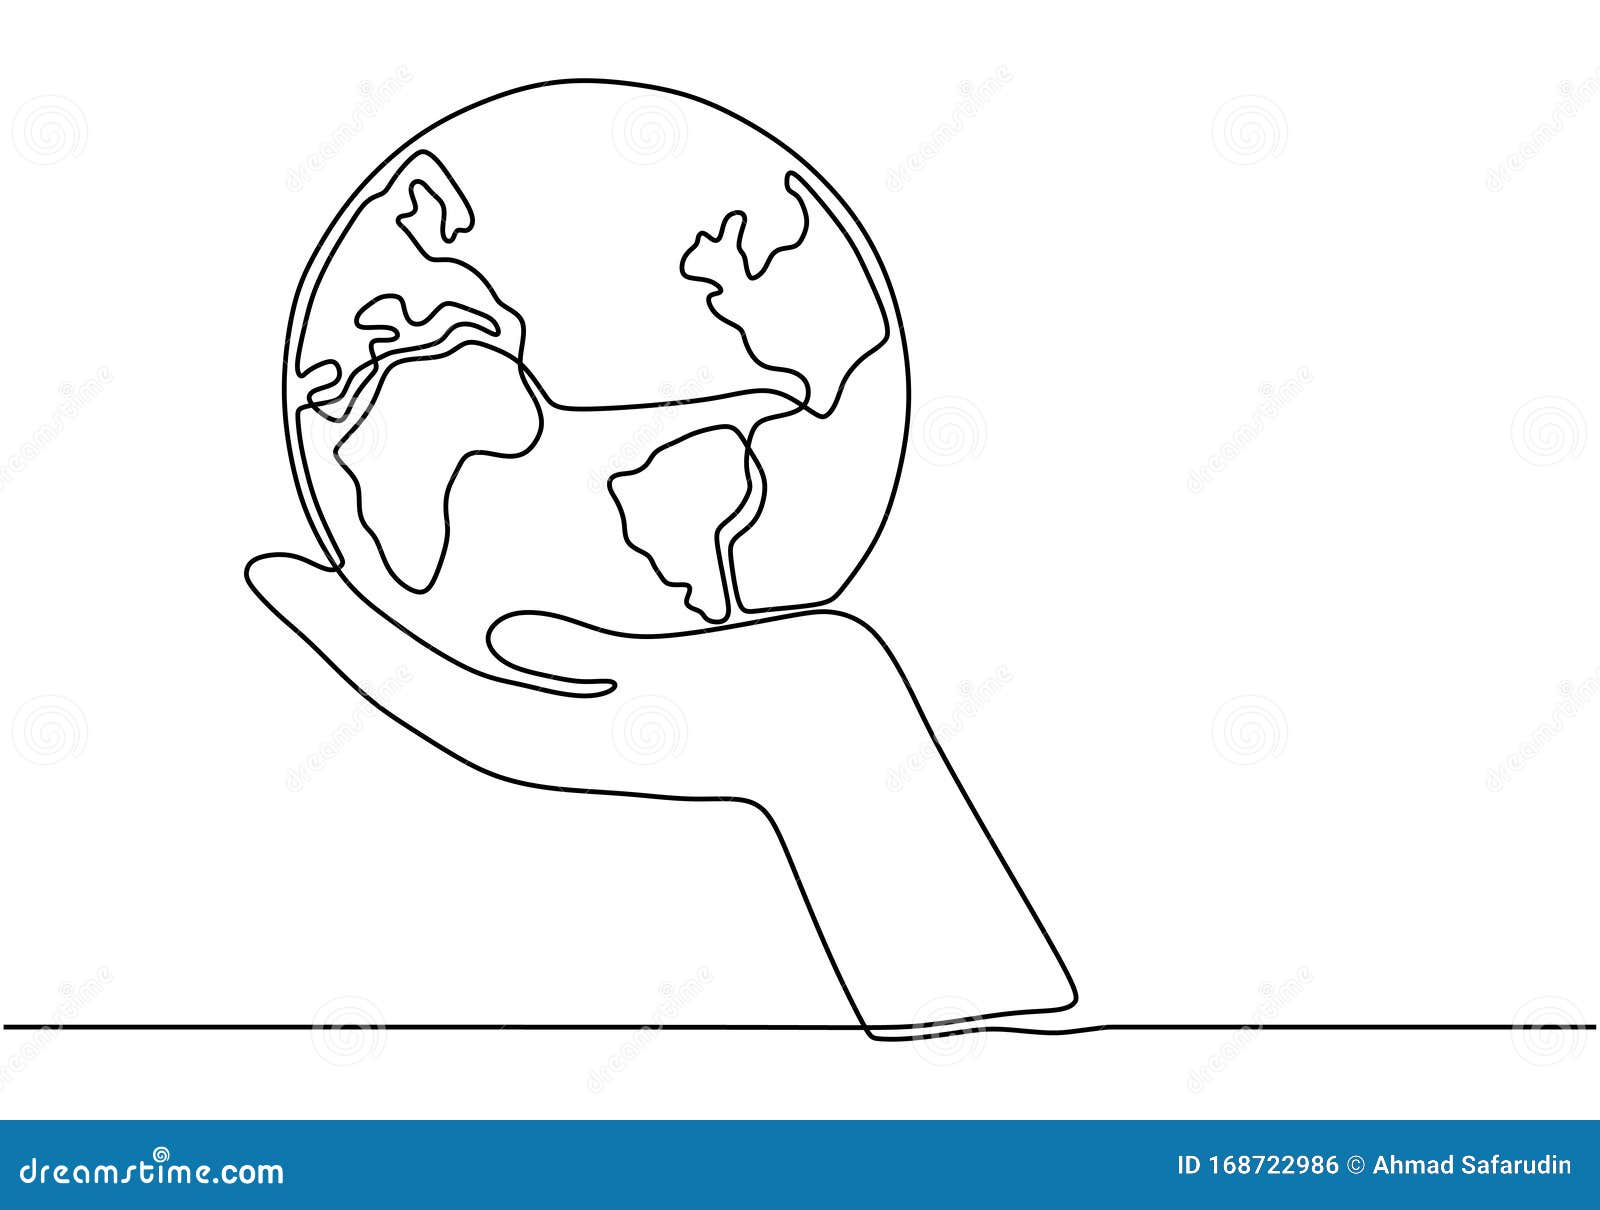 Hand Earth Drawing Stock Illustrations 11 744 Hand Earth Drawing Stock Illustrations Vectors Clipart Dreamstime